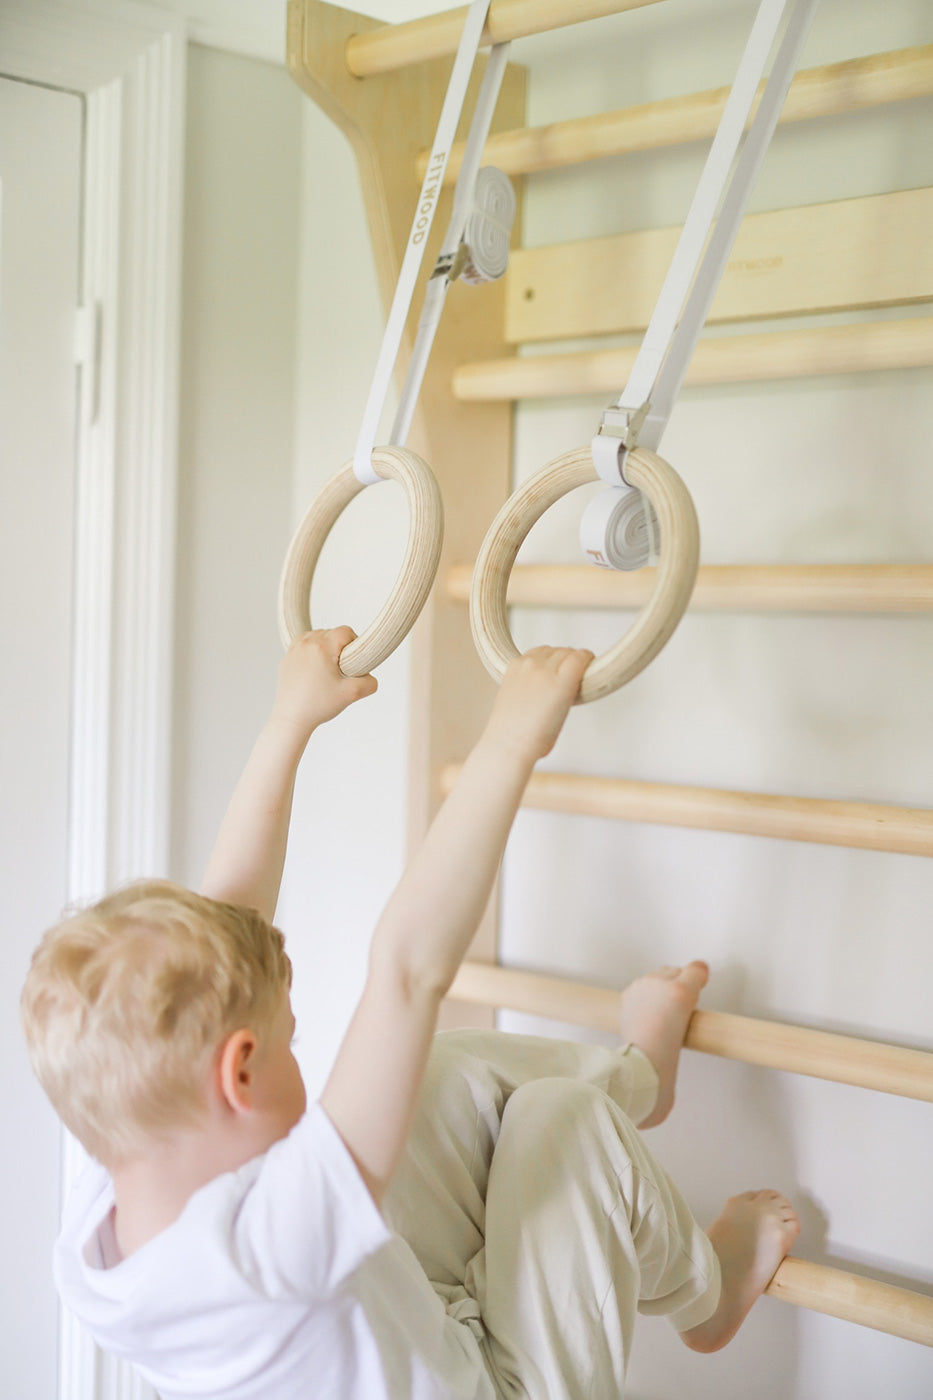 FitWood - TAIMI Wall Bars for Kids & Adults - White - All Mamas Children